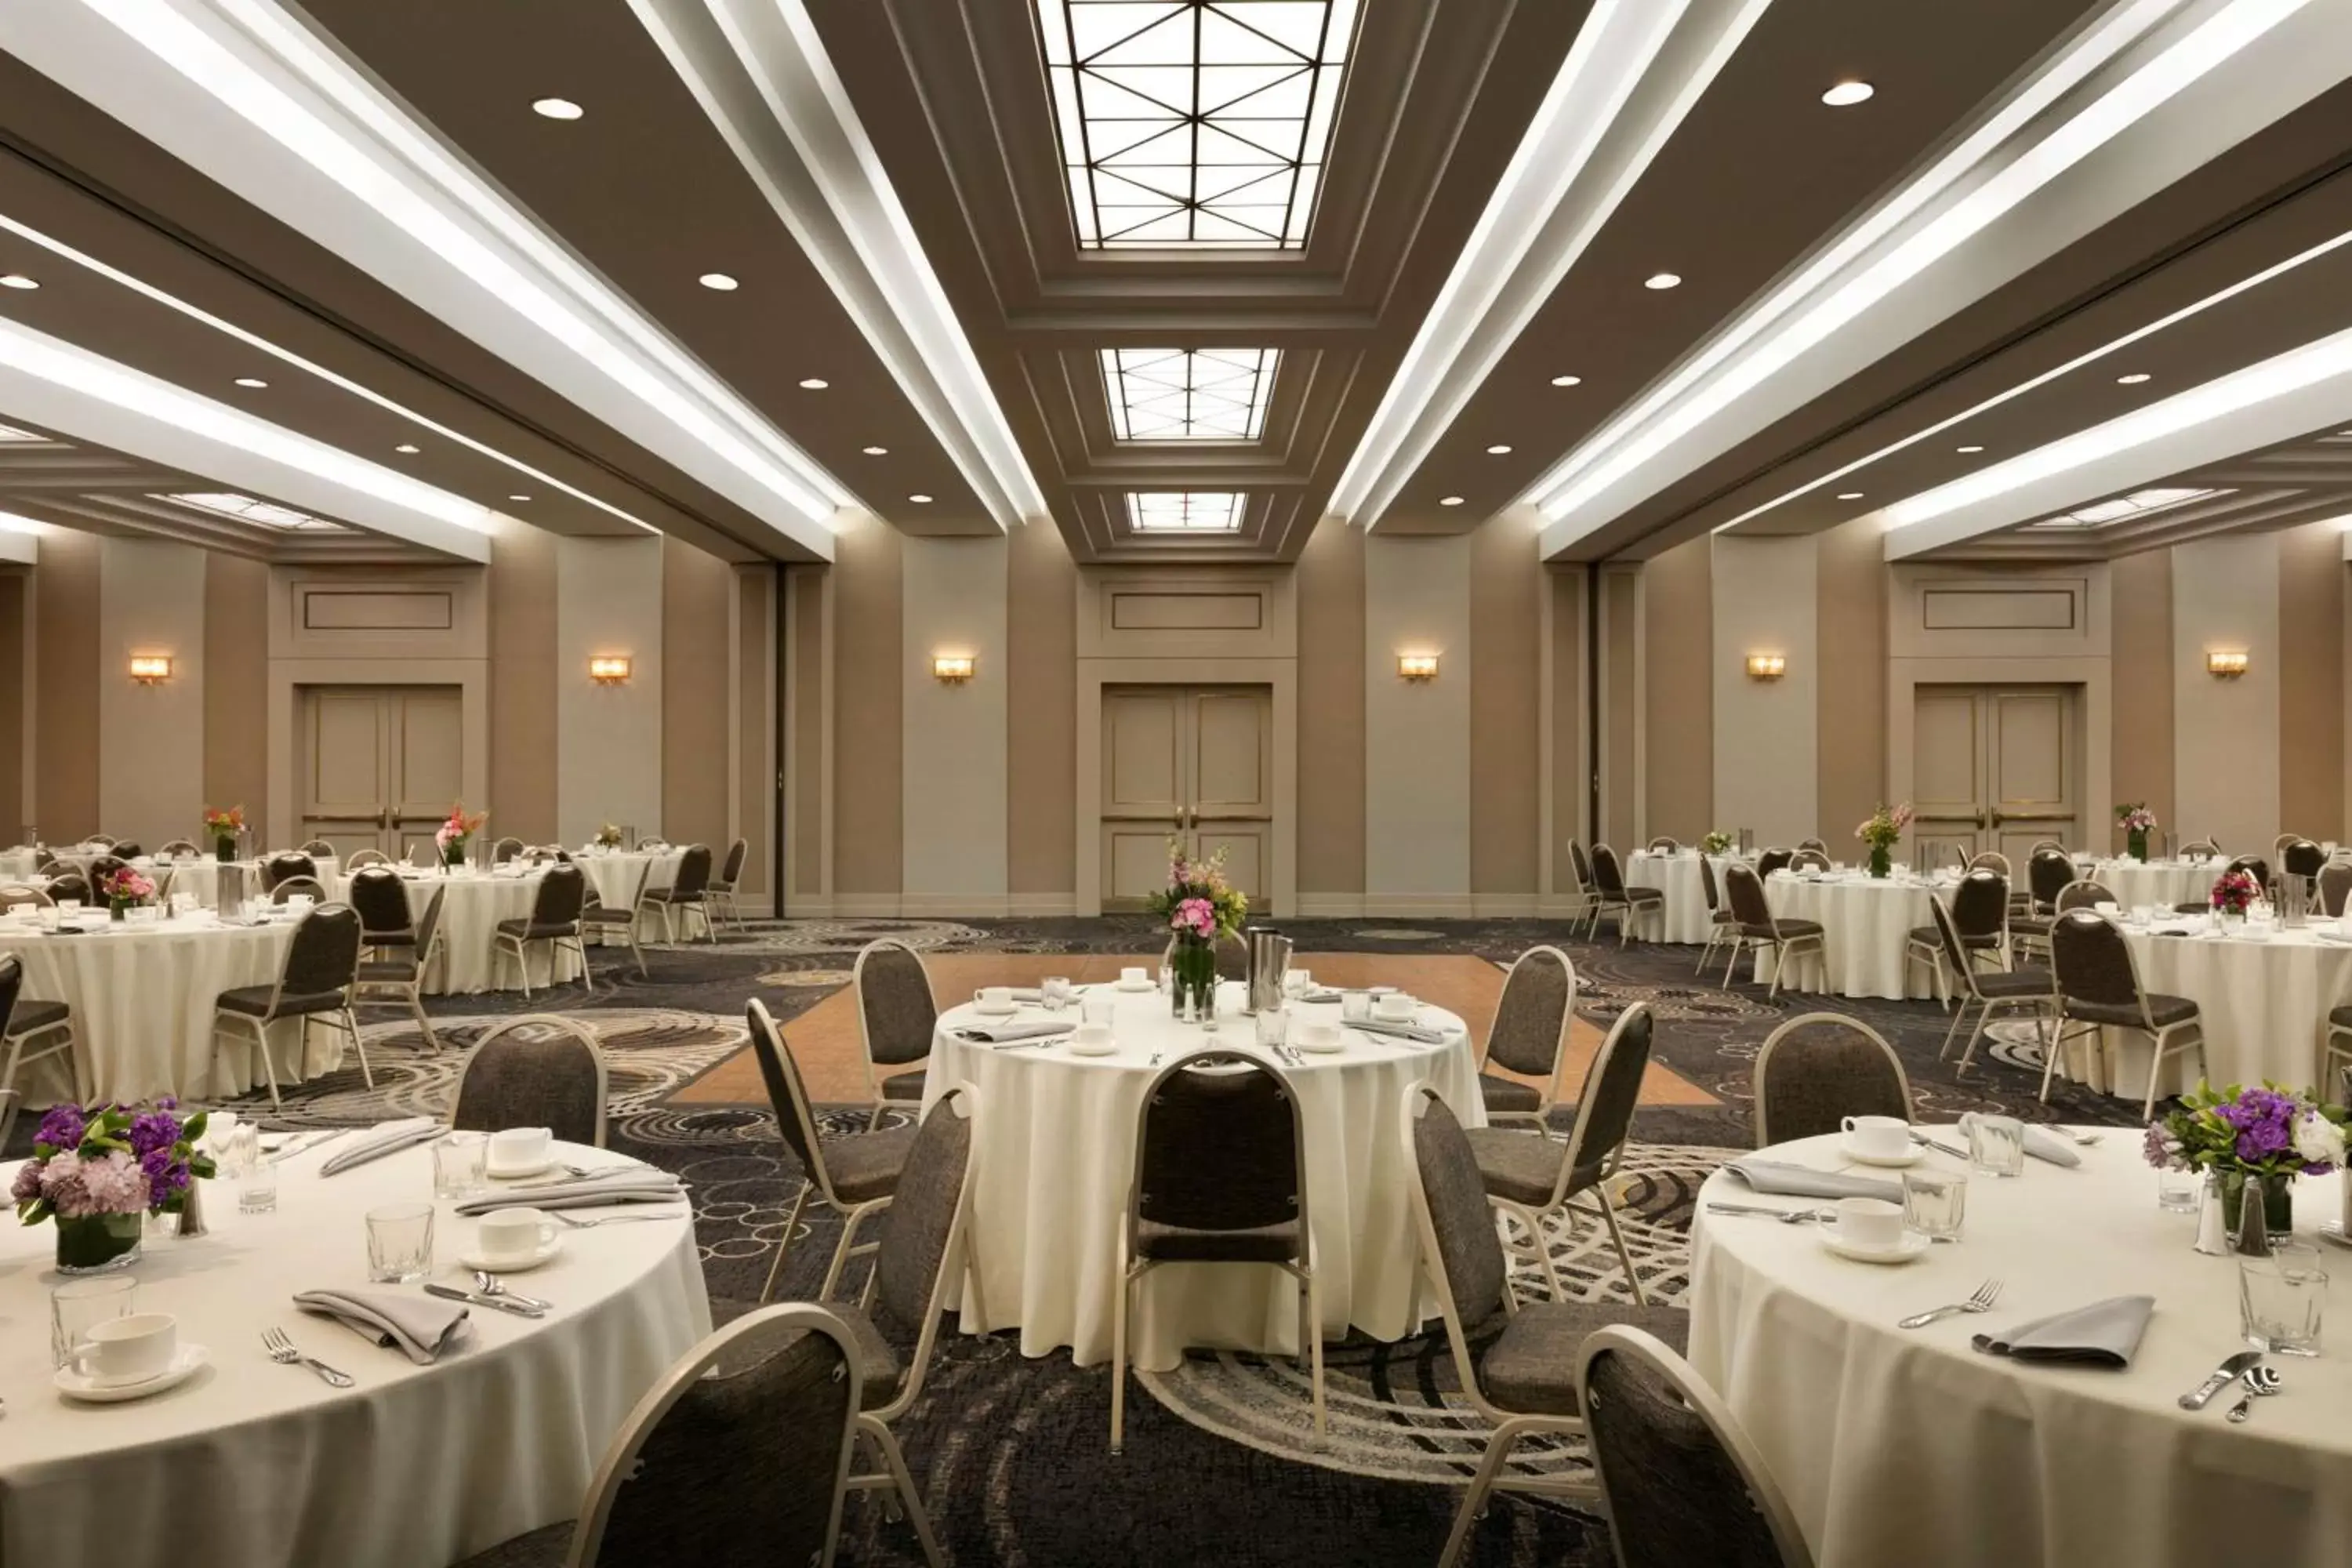 On site, Banquet Facilities in LaGuardia Plaza Hotel